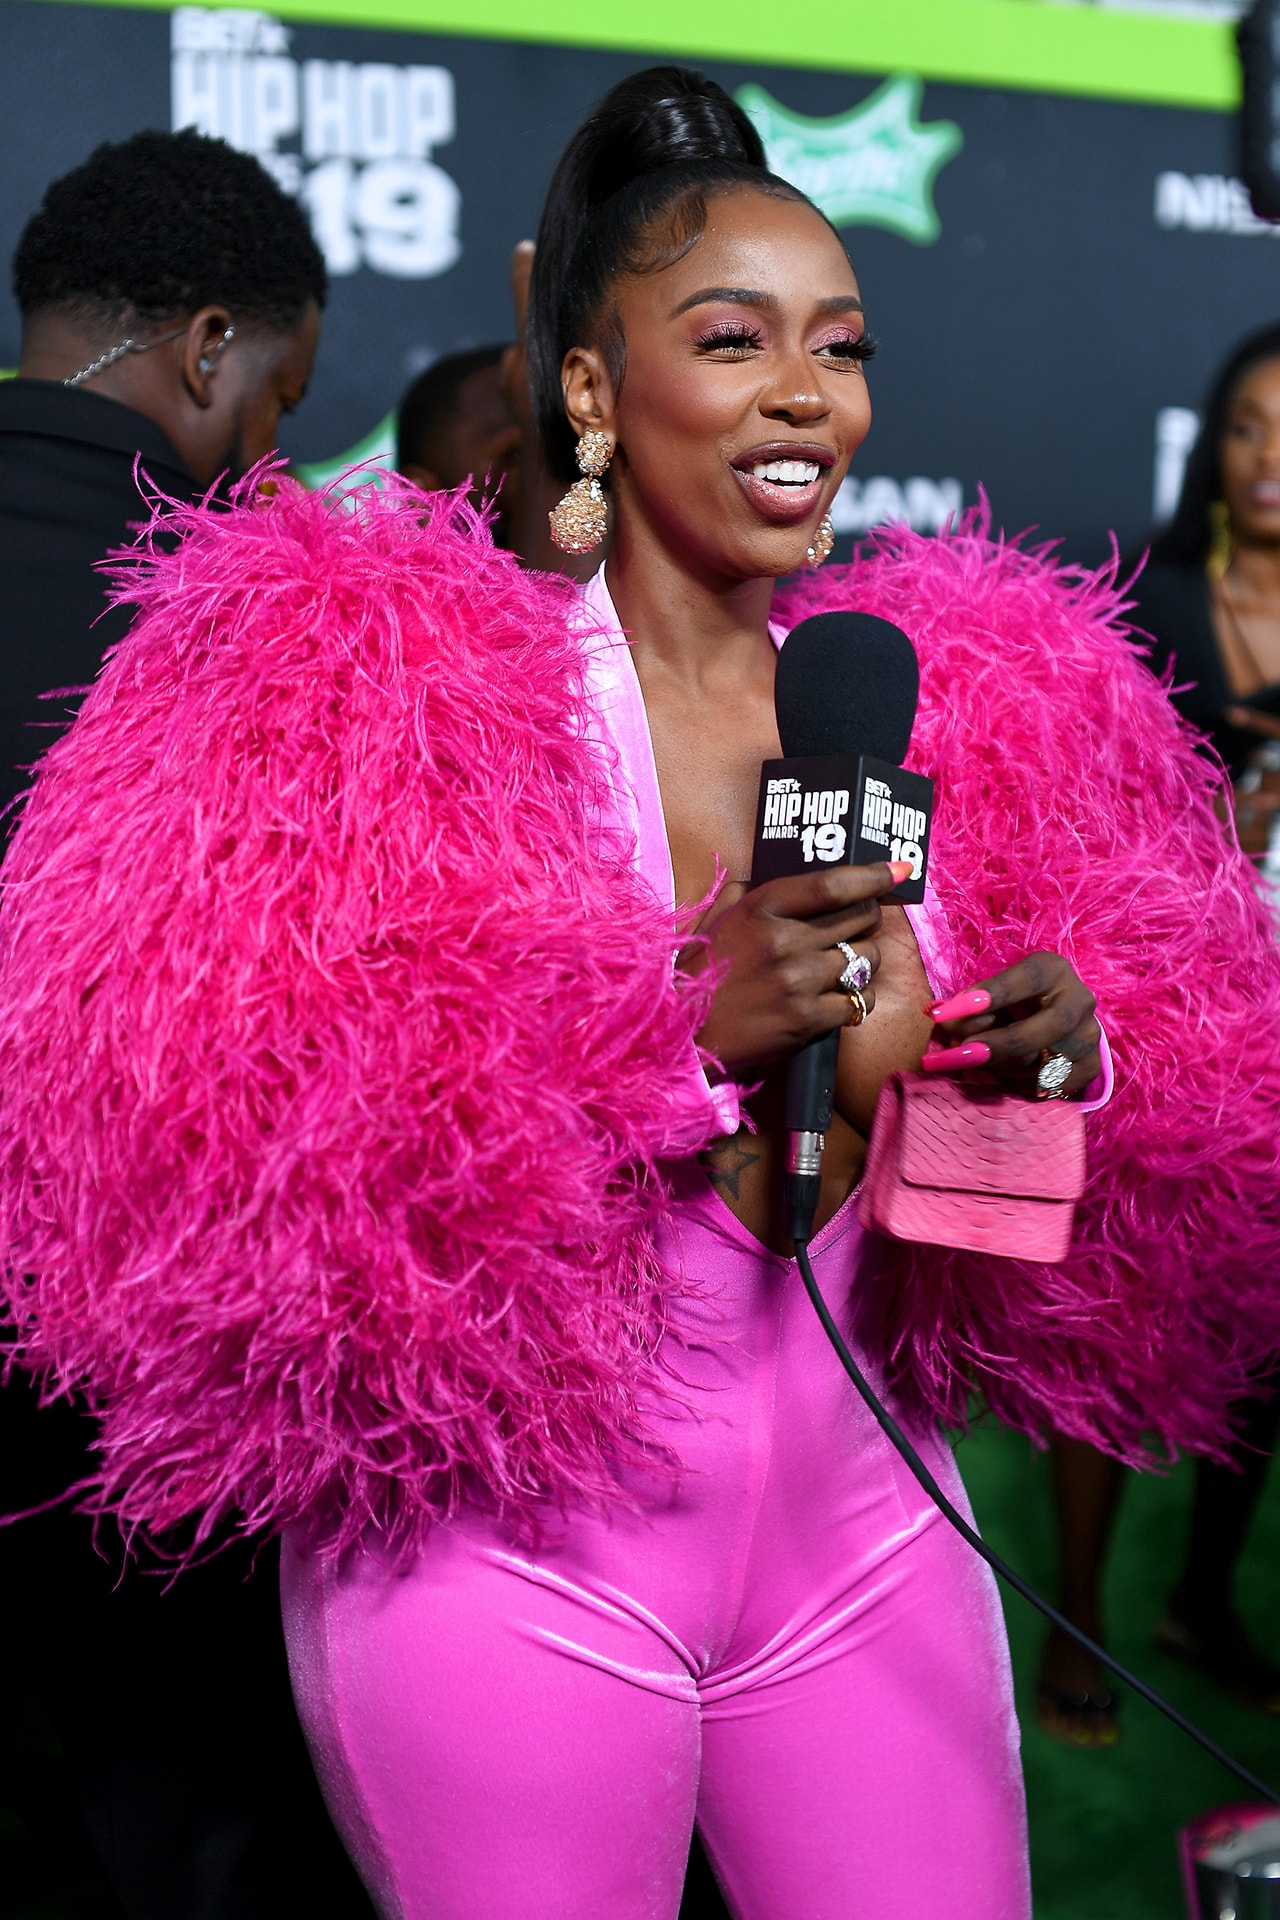 Kash Doll BET Hip Hop Awards 2019 Pink Feather Catsuit